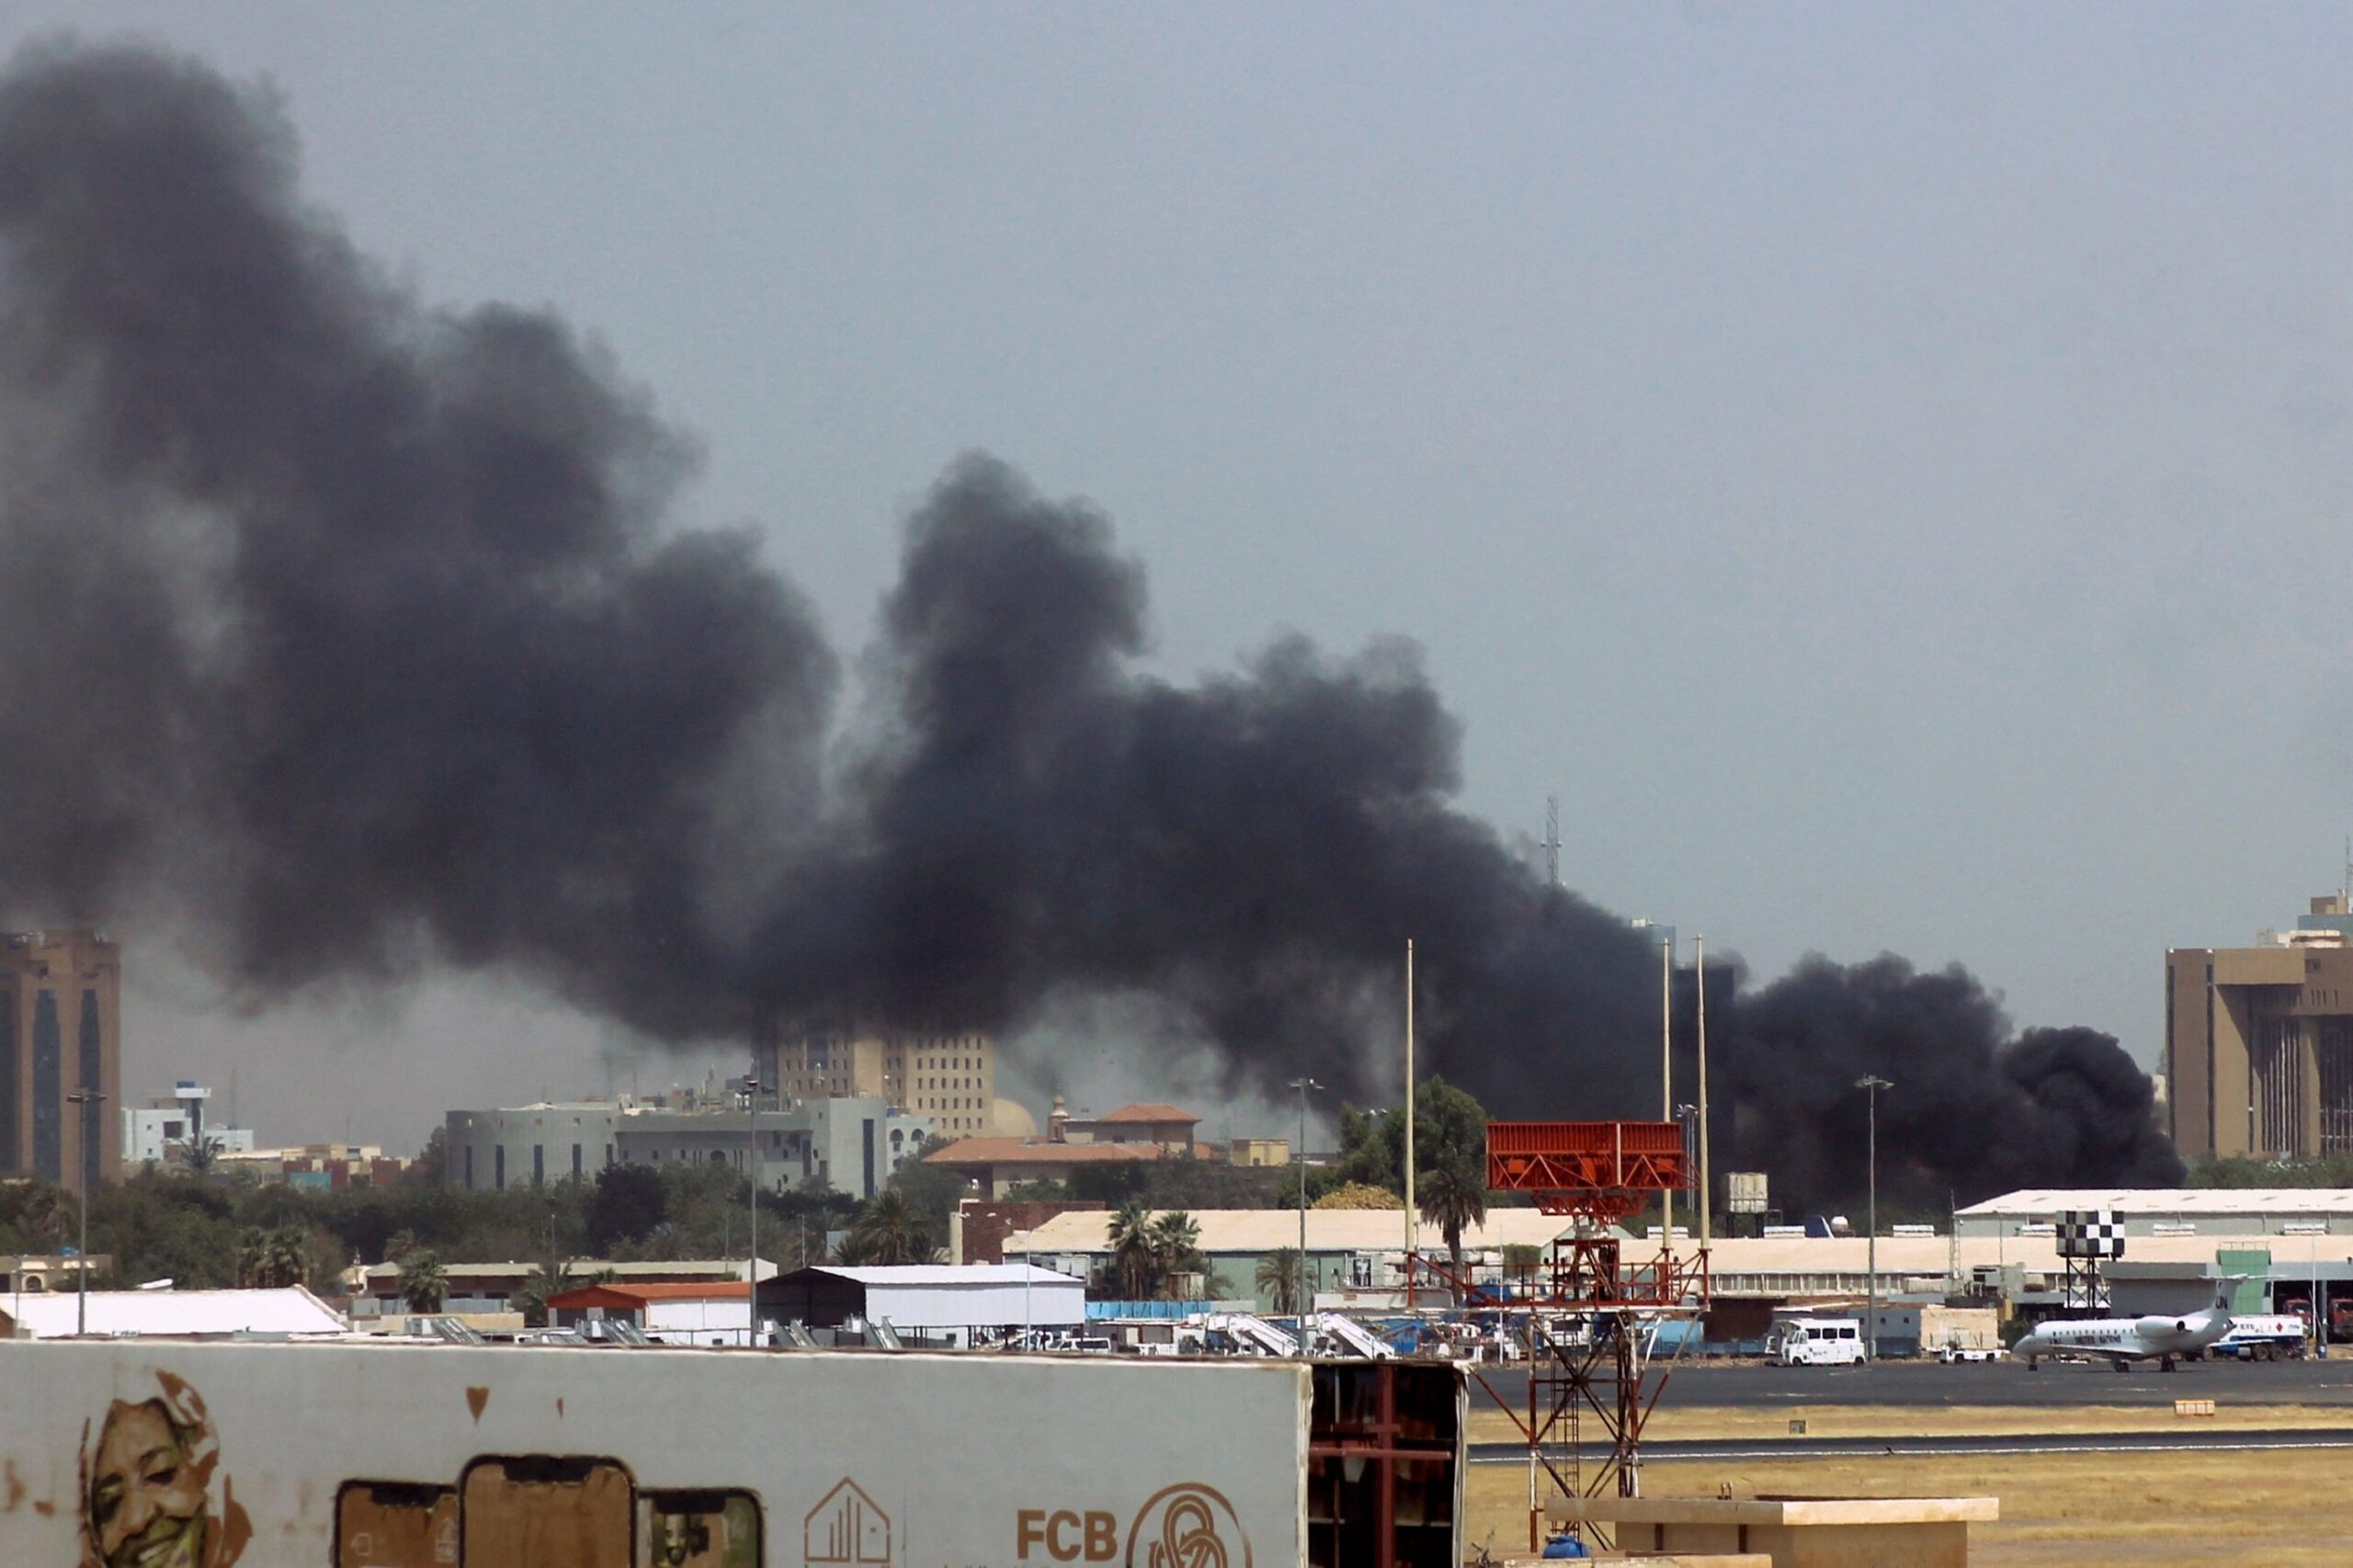 Heavy smoke bellows above buildings in the vicinity of the Khartoum airport, in Khartoum, Sudan